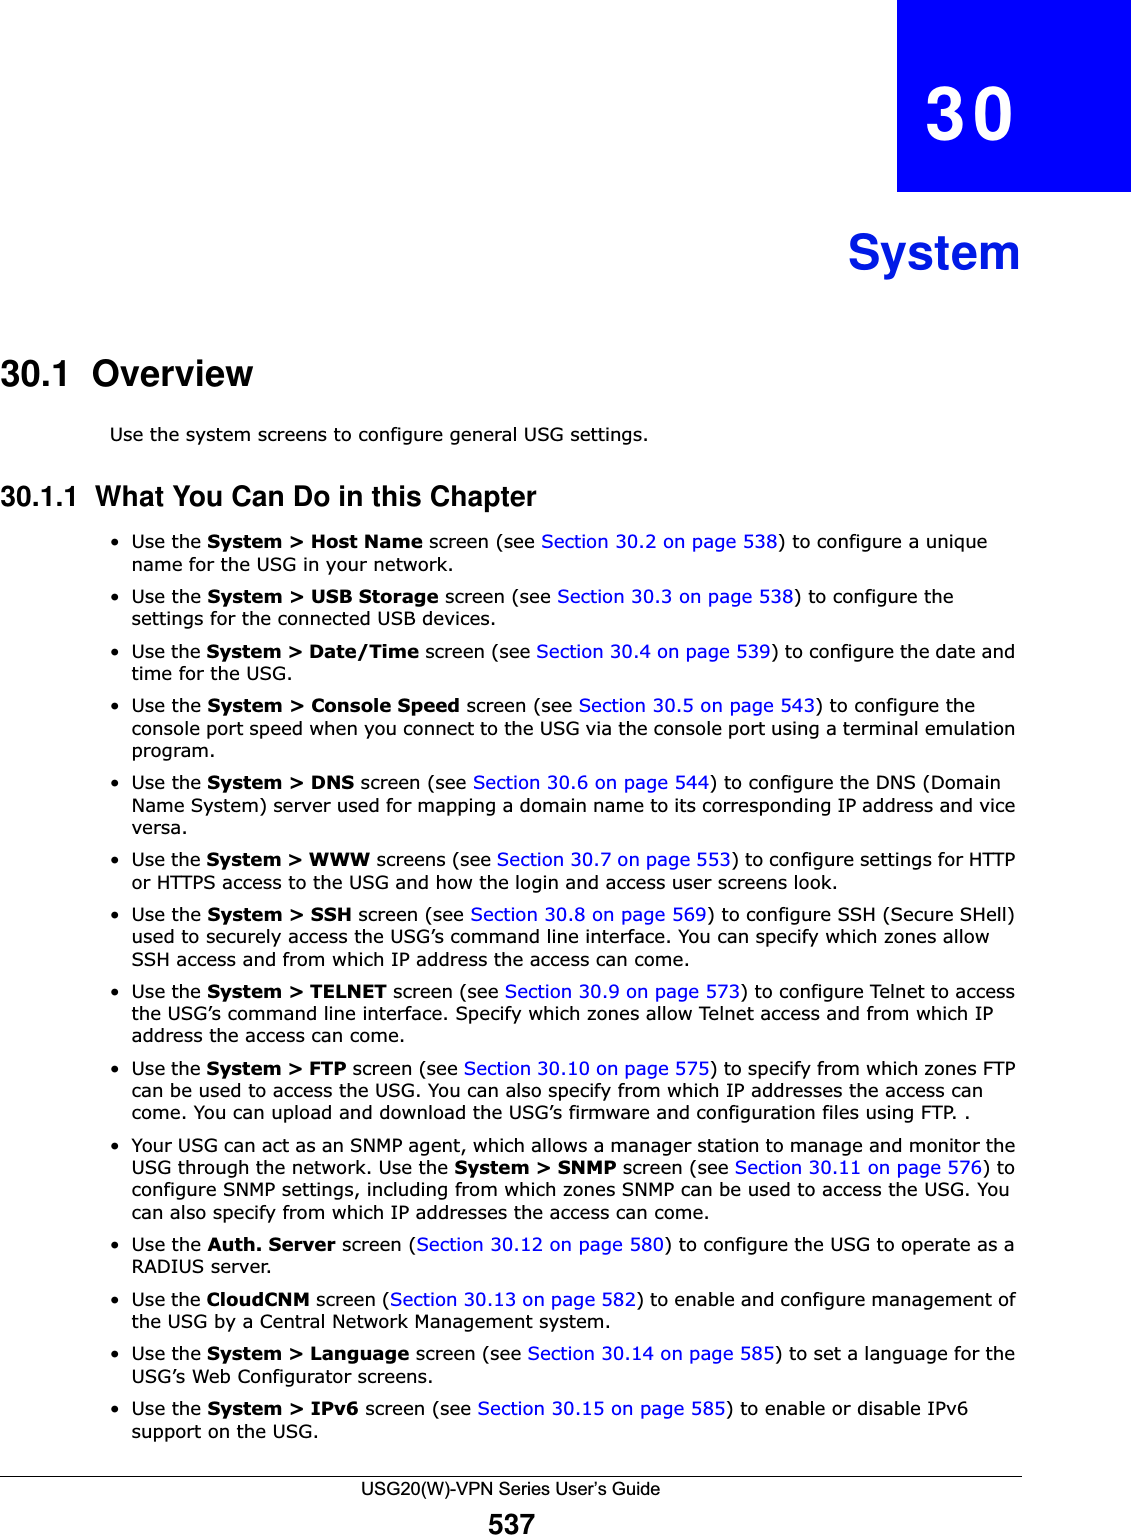 USG20(W)-VPN Series User’s Guide537CHAPTER   30System30.1  OverviewUse the system screens to configure general USG settings. 30.1.1  What You Can Do in this Chapter•Use the System &gt; Host Name screen (see Section 30.2 on page 538) to configure a unique name for the USG in your network.•Use the System &gt; USB Storage screen (see Section 30.3 on page 538) to configure the settings for the connected USB devices.•Use the System &gt; Date/Time screen (see Section 30.4 on page 539) to configure the date and time for the USG.•Use the System &gt; Console Speed screen (see Section 30.5 on page 543) to configure the console port speed when you connect to the USG via the console port using a terminal emulation program.•Use the System &gt; DNS screen (see Section 30.6 on page 544) to configure the DNS (Domain Name System) server used for mapping a domain name to its corresponding IP address and vice versa.•Use the System &gt; WWW screens (see Section 30.7 on page 553) to configure settings for HTTP or HTTPS access to the USG and how the login and access user screens look. •Use the System &gt; SSH screen (see Section 30.8 on page 569) to configure SSH (Secure SHell) used to securely access the USG’s command line interface. You can specify which zones allow SSH access and from which IP address the access can come. •Use the System &gt; TELNET screen (see Section 30.9 on page 573) to configure Telnet to access the USG’s command line interface. Specify which zones allow Telnet access and from which IP address the access can come.•Use the System &gt; FTP screen (see Section 30.10 on page 575) to specify from which zones FTP can be used to access the USG. You can also specify from which IP addresses the access can come. You can upload and download the USG’s firmware and configuration files using FTP. .• Your USG can act as an SNMP agent, which allows a manager station to manage and monitor the USG through the network. Use the System &gt; SNMP screen (see Section 30.11 on page 576) to configure SNMP settings, including from which zones SNMP can be used to access the USG. You can also specify from which IP addresses the access can come.•Use the Auth. Server screen (Section 30.12 on page 580) to configure the USG to operate as a RADIUS server.•Use the CloudCNM screen (Section 30.13 on page 582) to enable and configure management of the USG by a Central Network Management system.•Use the System &gt; Language screen (see Section 30.14 on page 585) to set a language for the USG’s Web Configurator screens.•Use the System &gt; IPv6 screen (see Section 30.15 on page 585) to enable or disable IPv6 support on the USG.